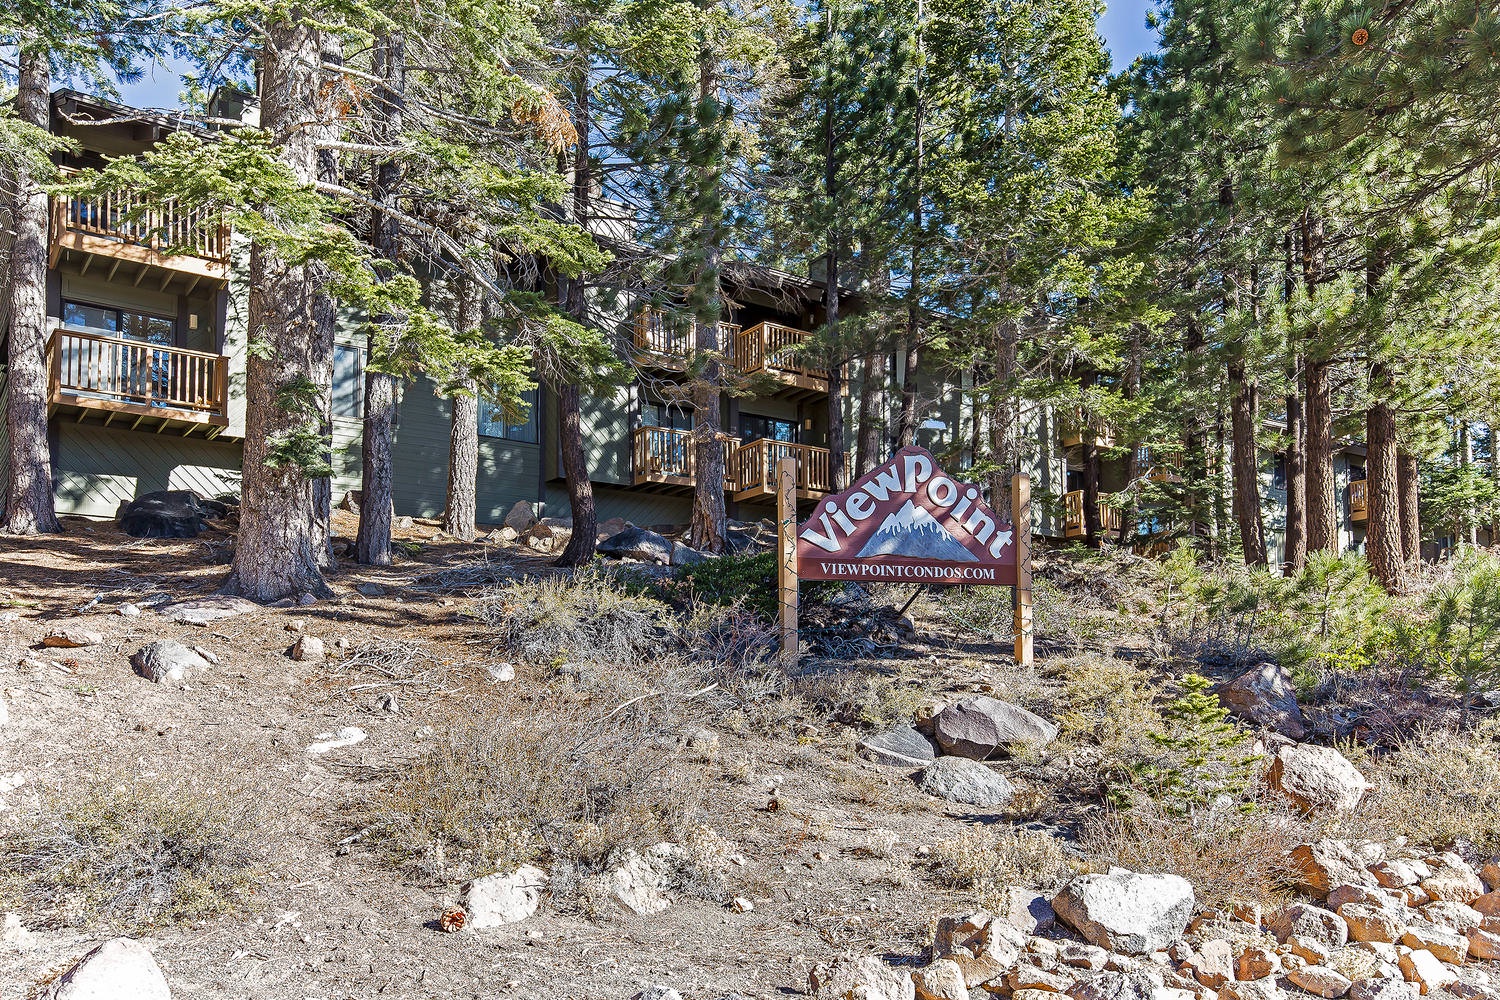 Welcome to the Viewpoint Condos in Mammoth Lakes